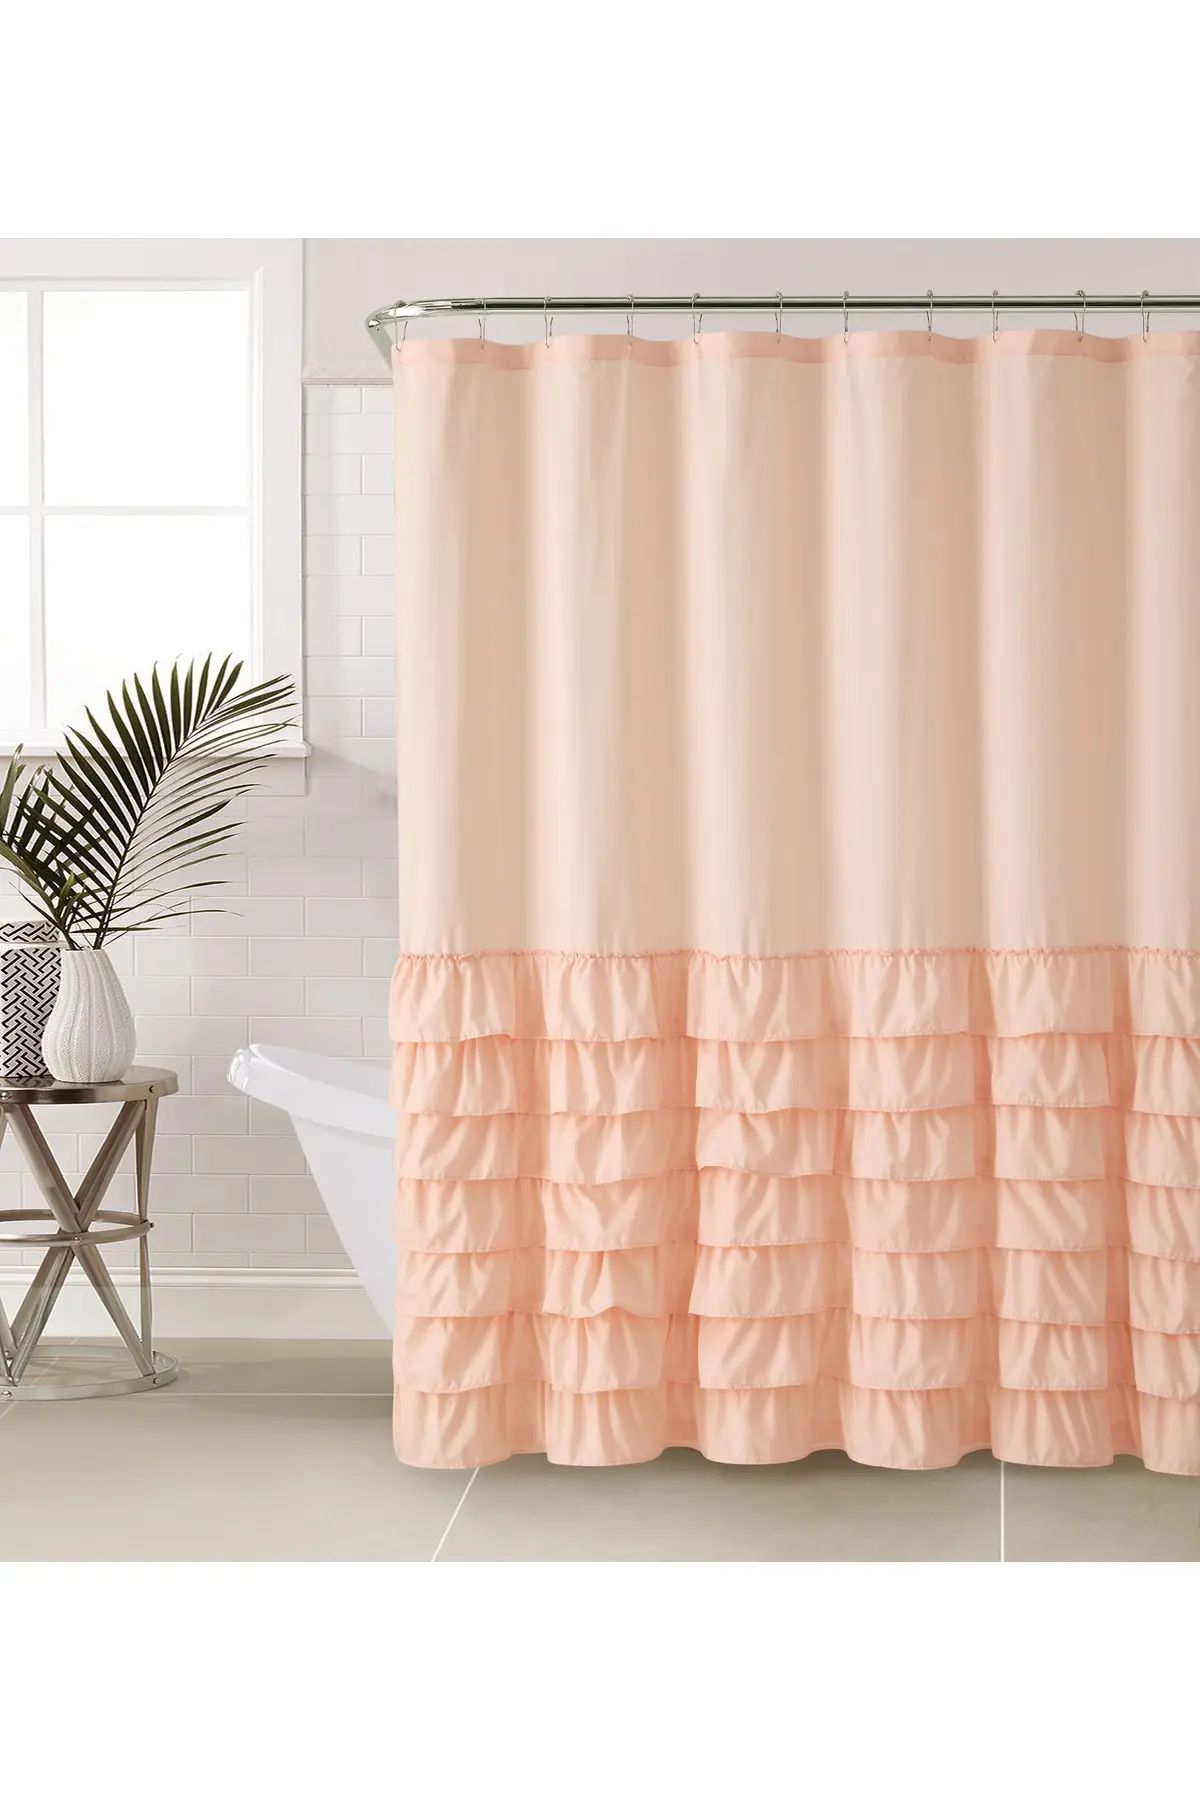 VCNY HOME Pink Melanie Ruffle Shower Curtain at Nordstrom Rack | Nordstrom Rack